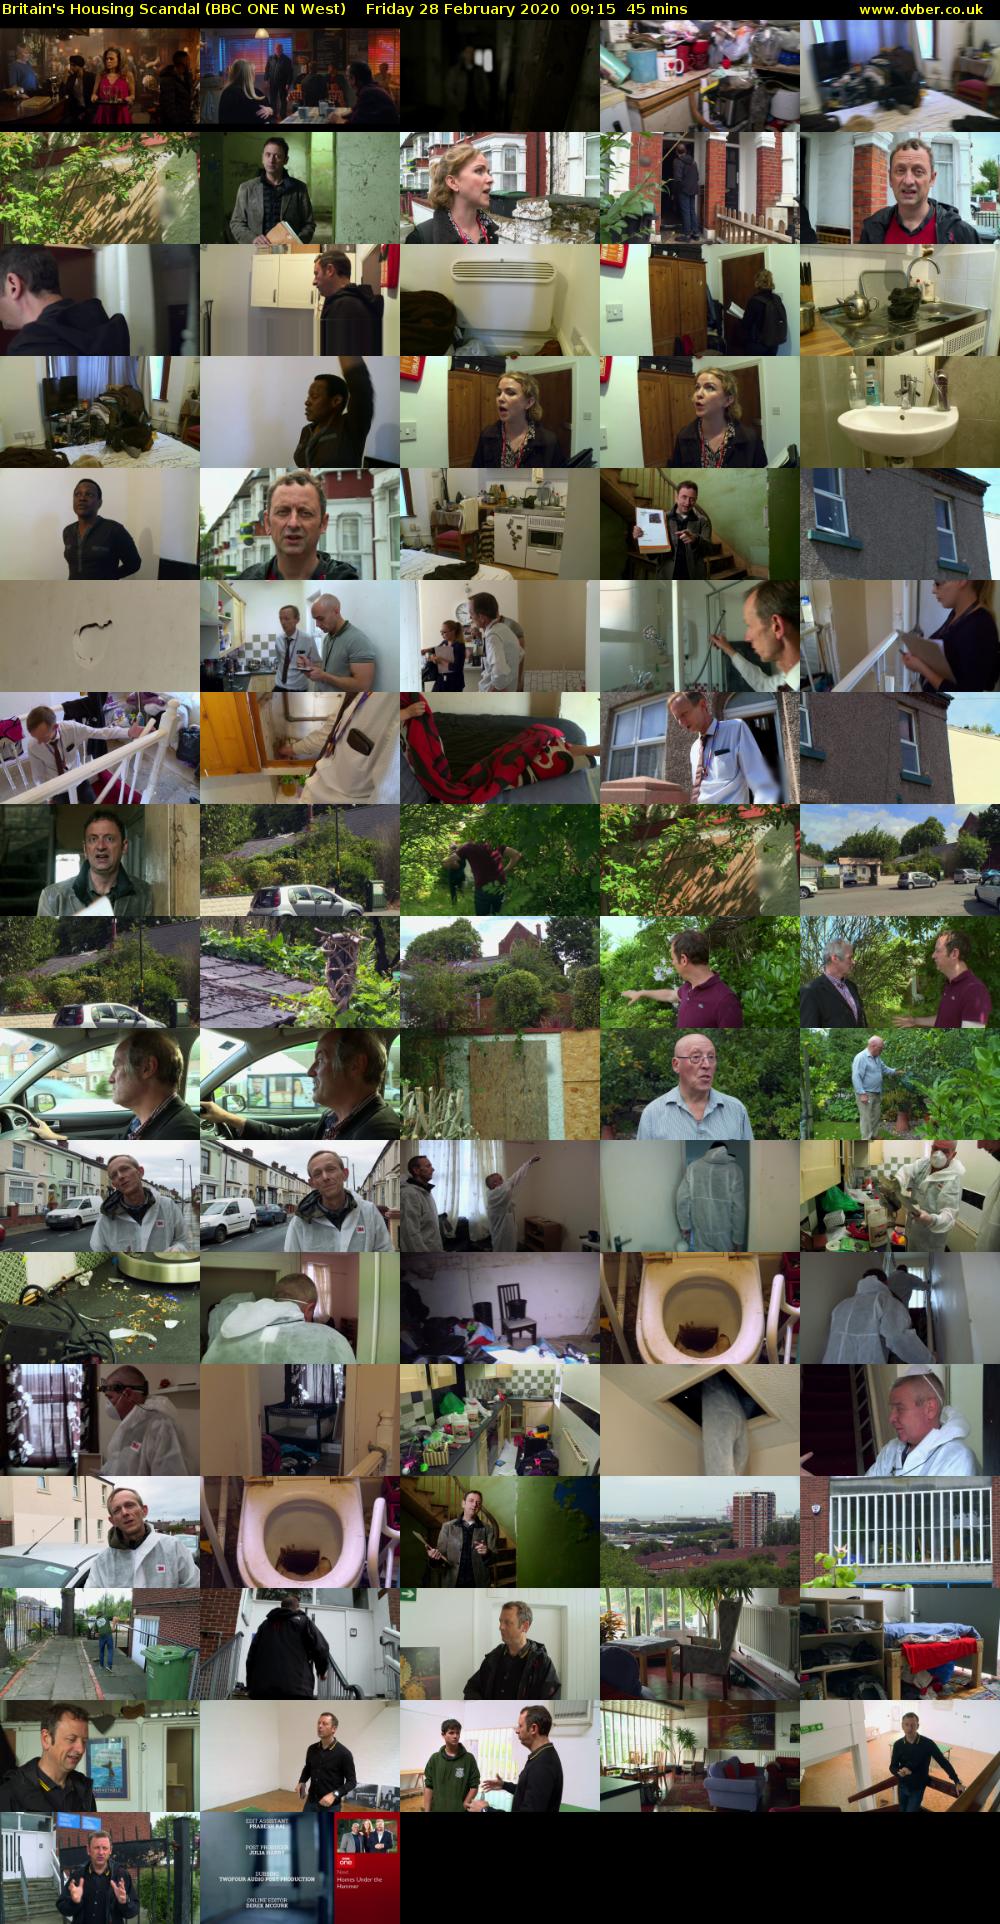 Britain's Housing Scandal (BBC ONE N West) Friday 28 February 2020 09:15 - 10:00